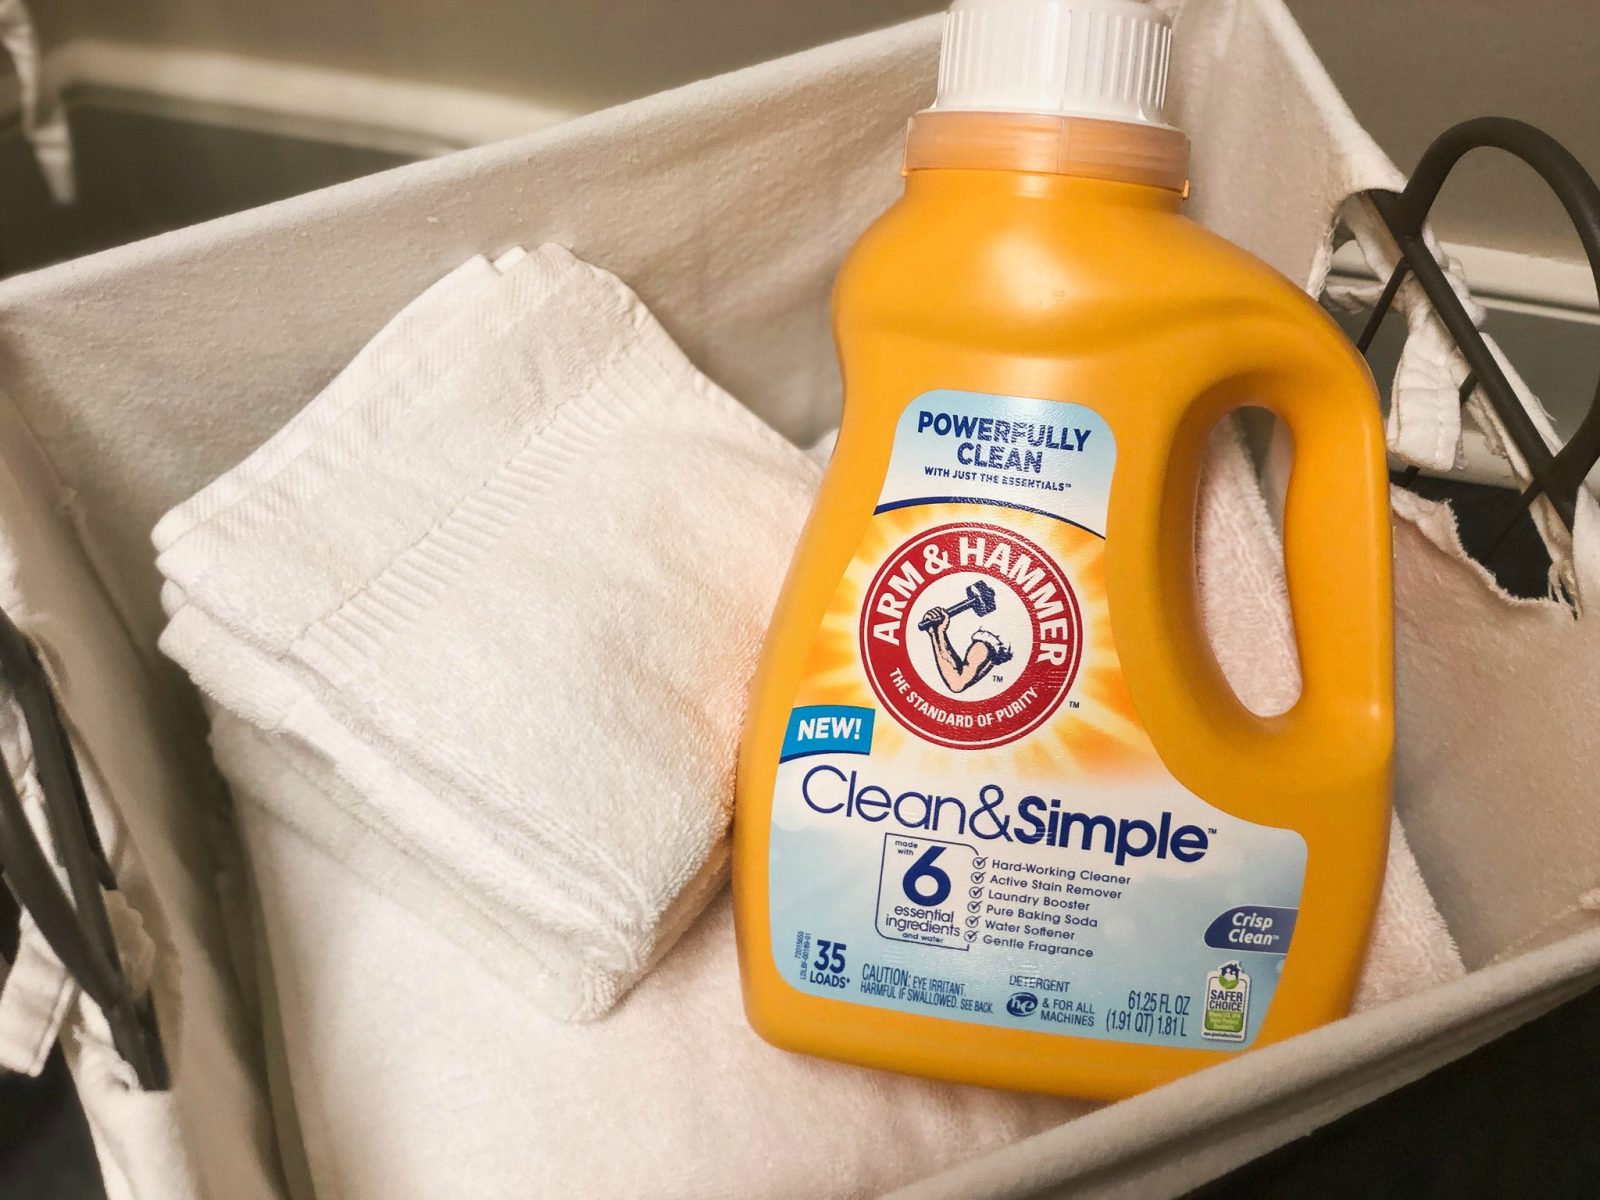 Get Savings On ARM & HAMMER™ Clean & Simple™ Products At Publix & Enjoy A Powerful Clean With Only Essential Ingredients